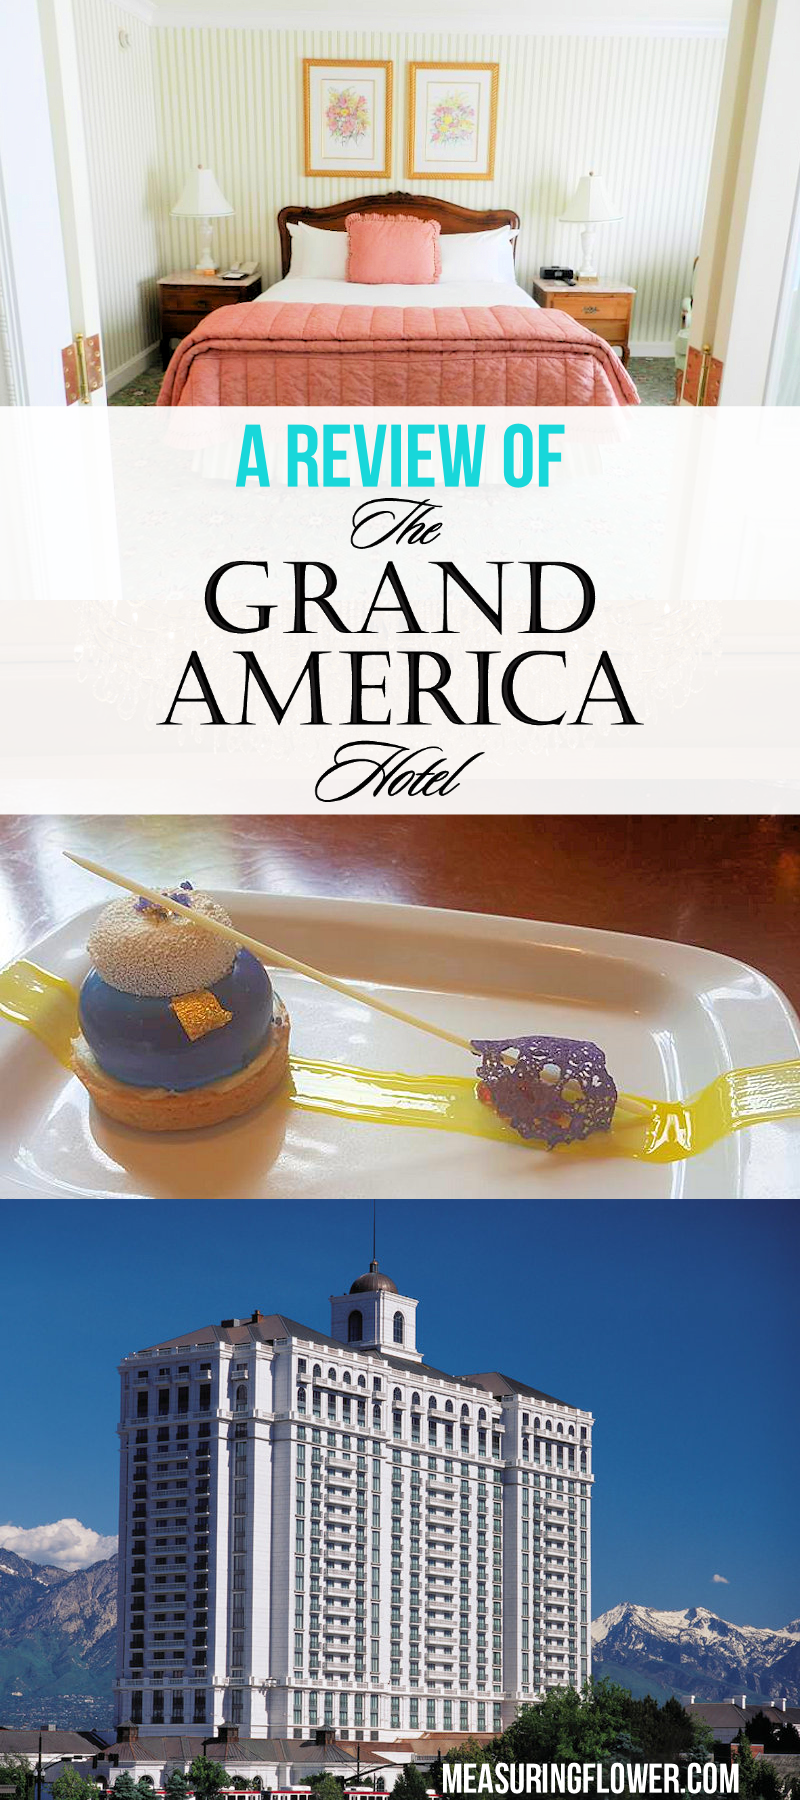 A Review of the Grand America Hotel